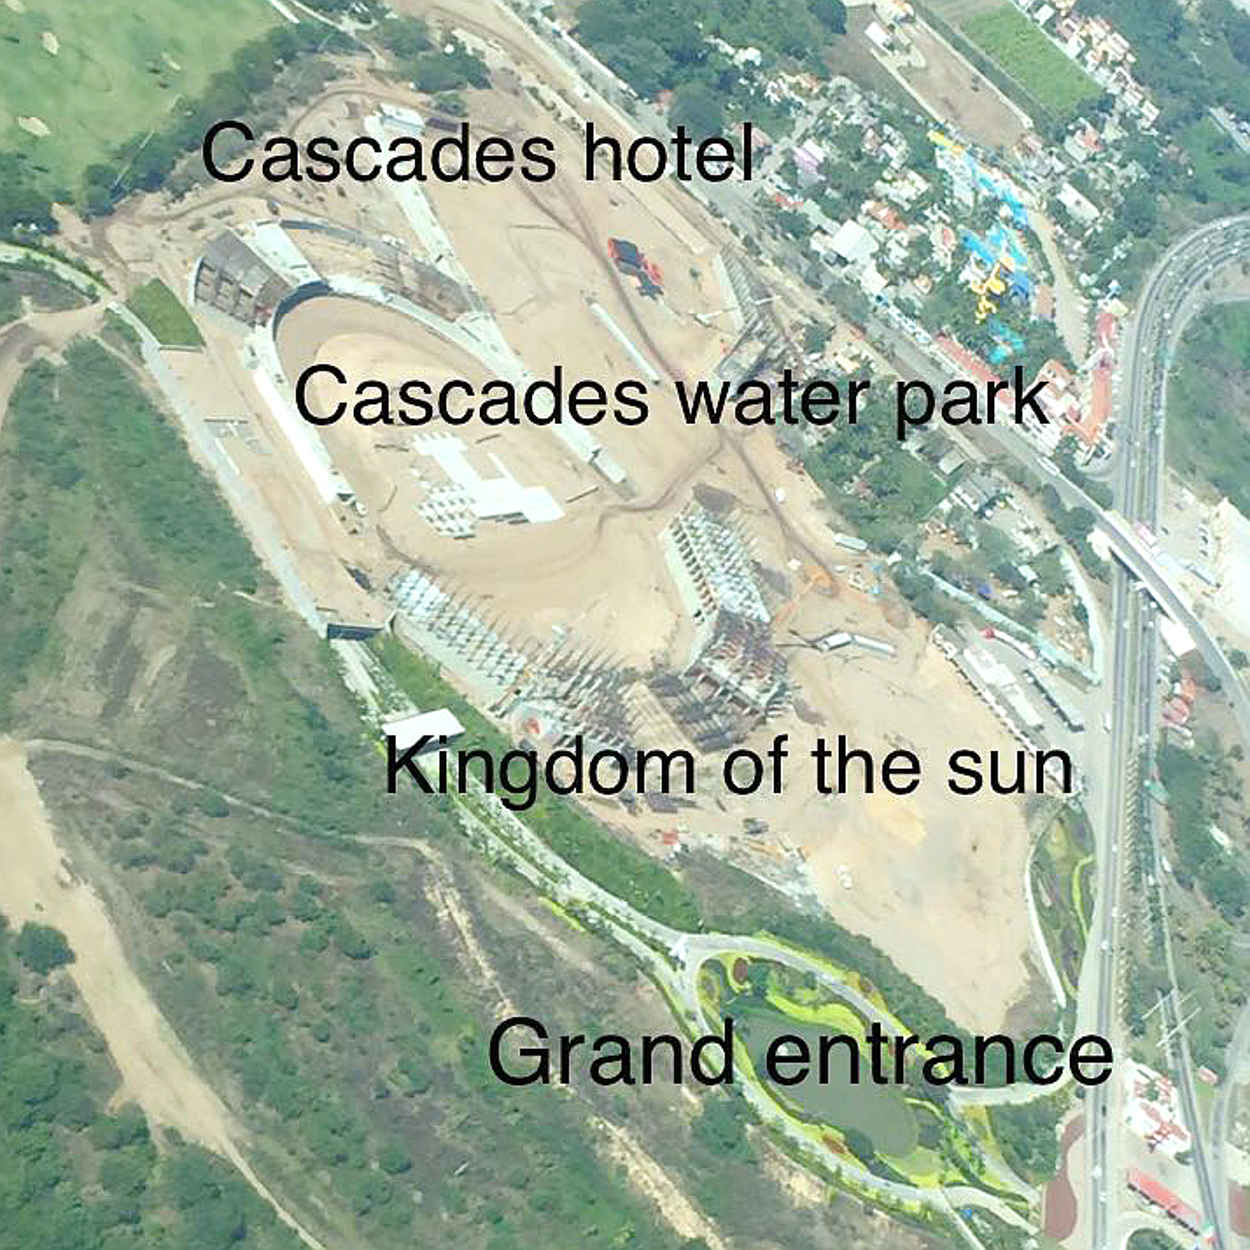 There may be two hotels under construction: Cascades and Kingdom of the Sun.  According to the image, the water park may be between the two hotels.